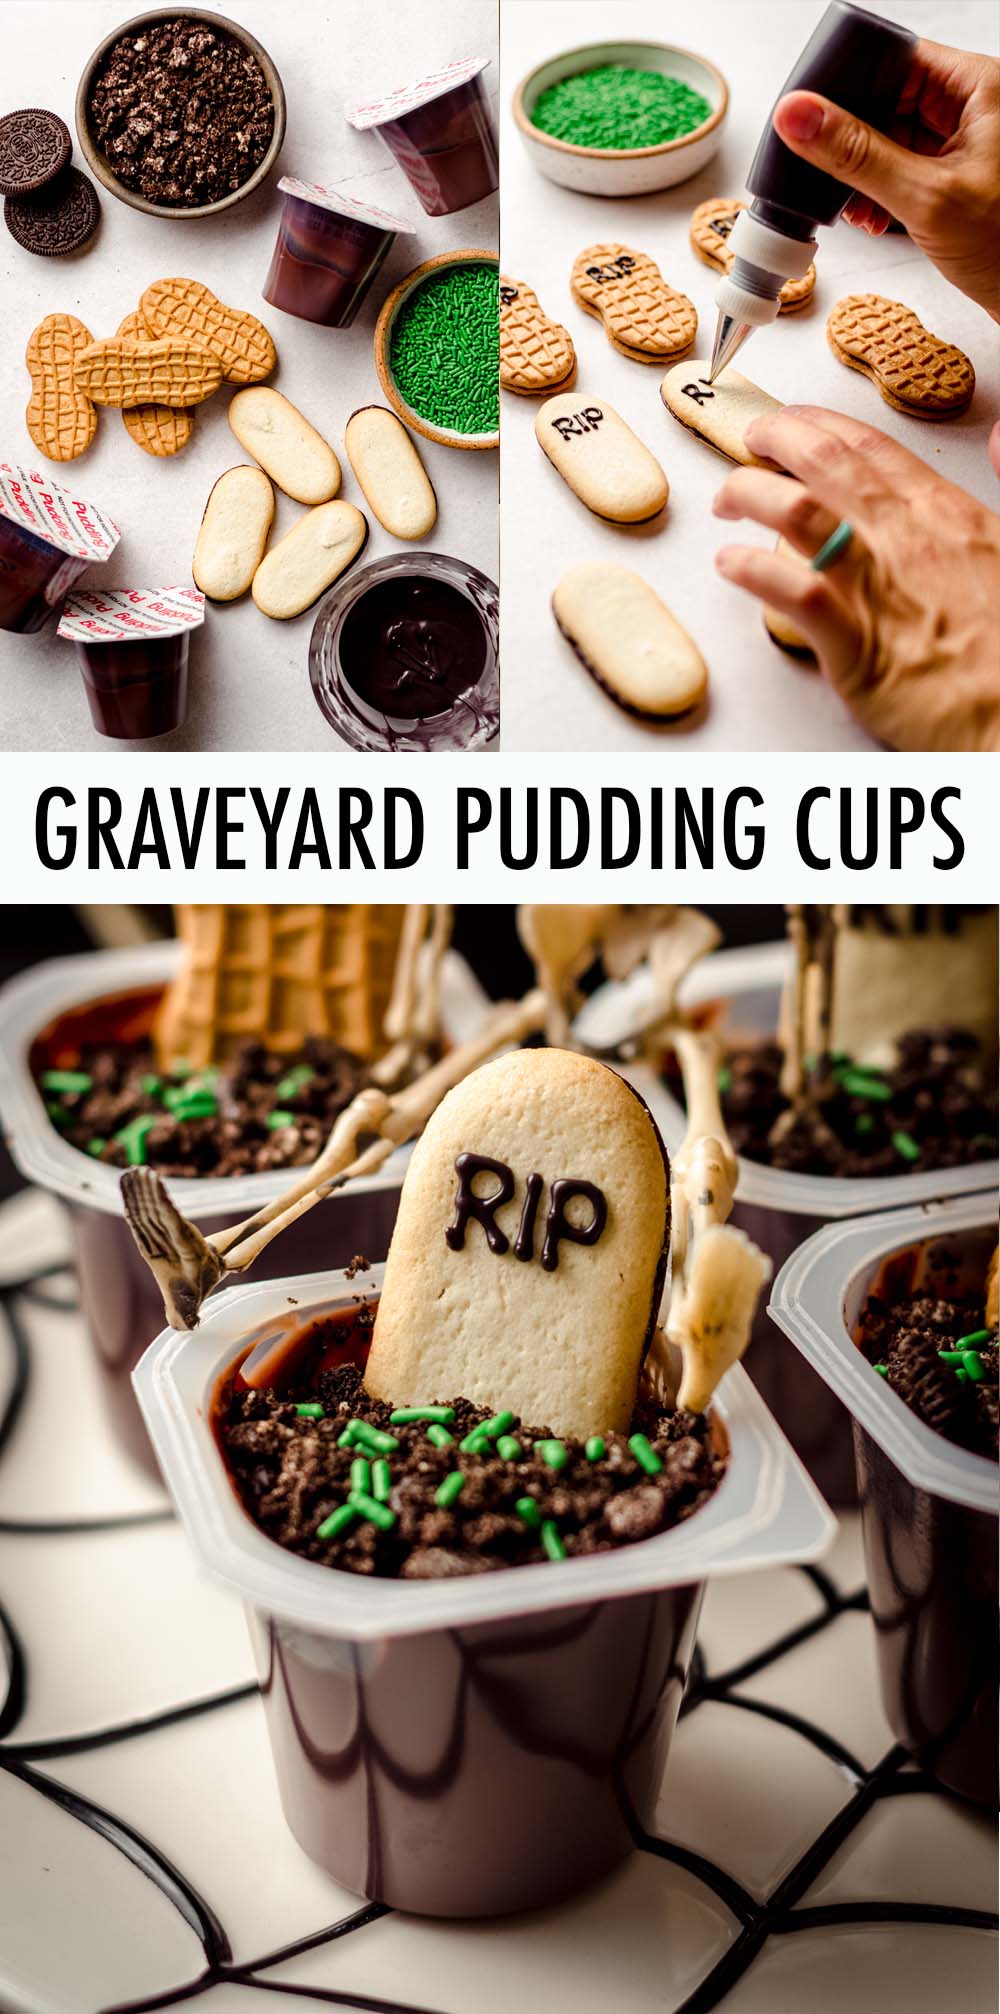 Turn pre-made pudding cups and cookies into cute no-bake Halloween treats fit for any ghost, ghoul, or zombie. Great for kids to make and eat and perfect for your Halloween party spread! via @frshaprilflours